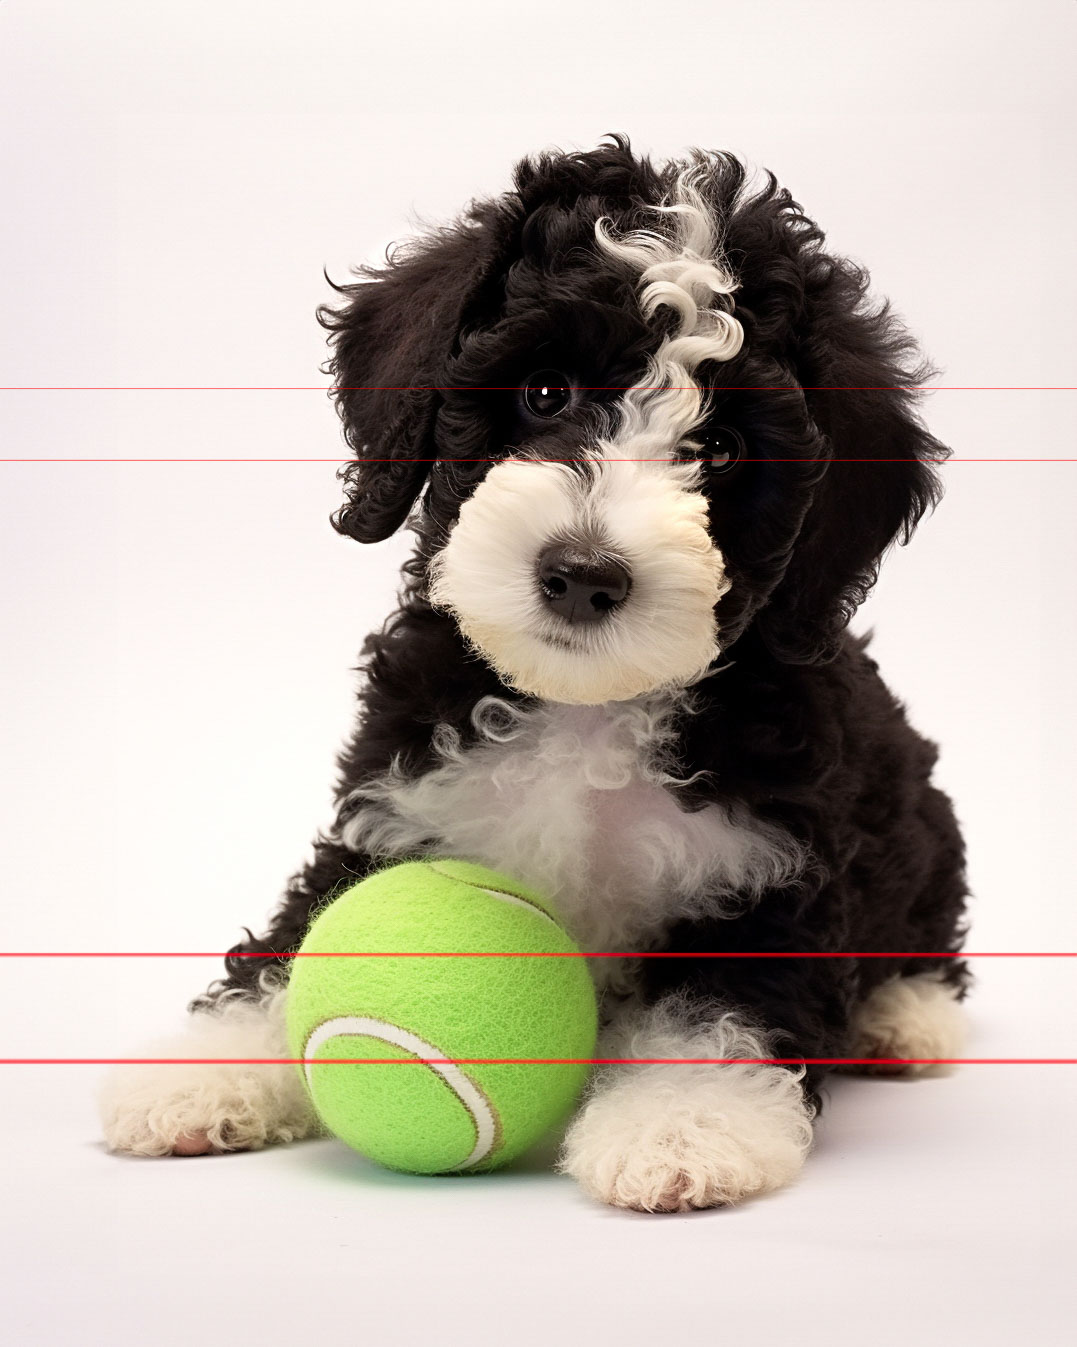 B&W Parti-Colored Standard Poodle Puppy with Tennis Ball